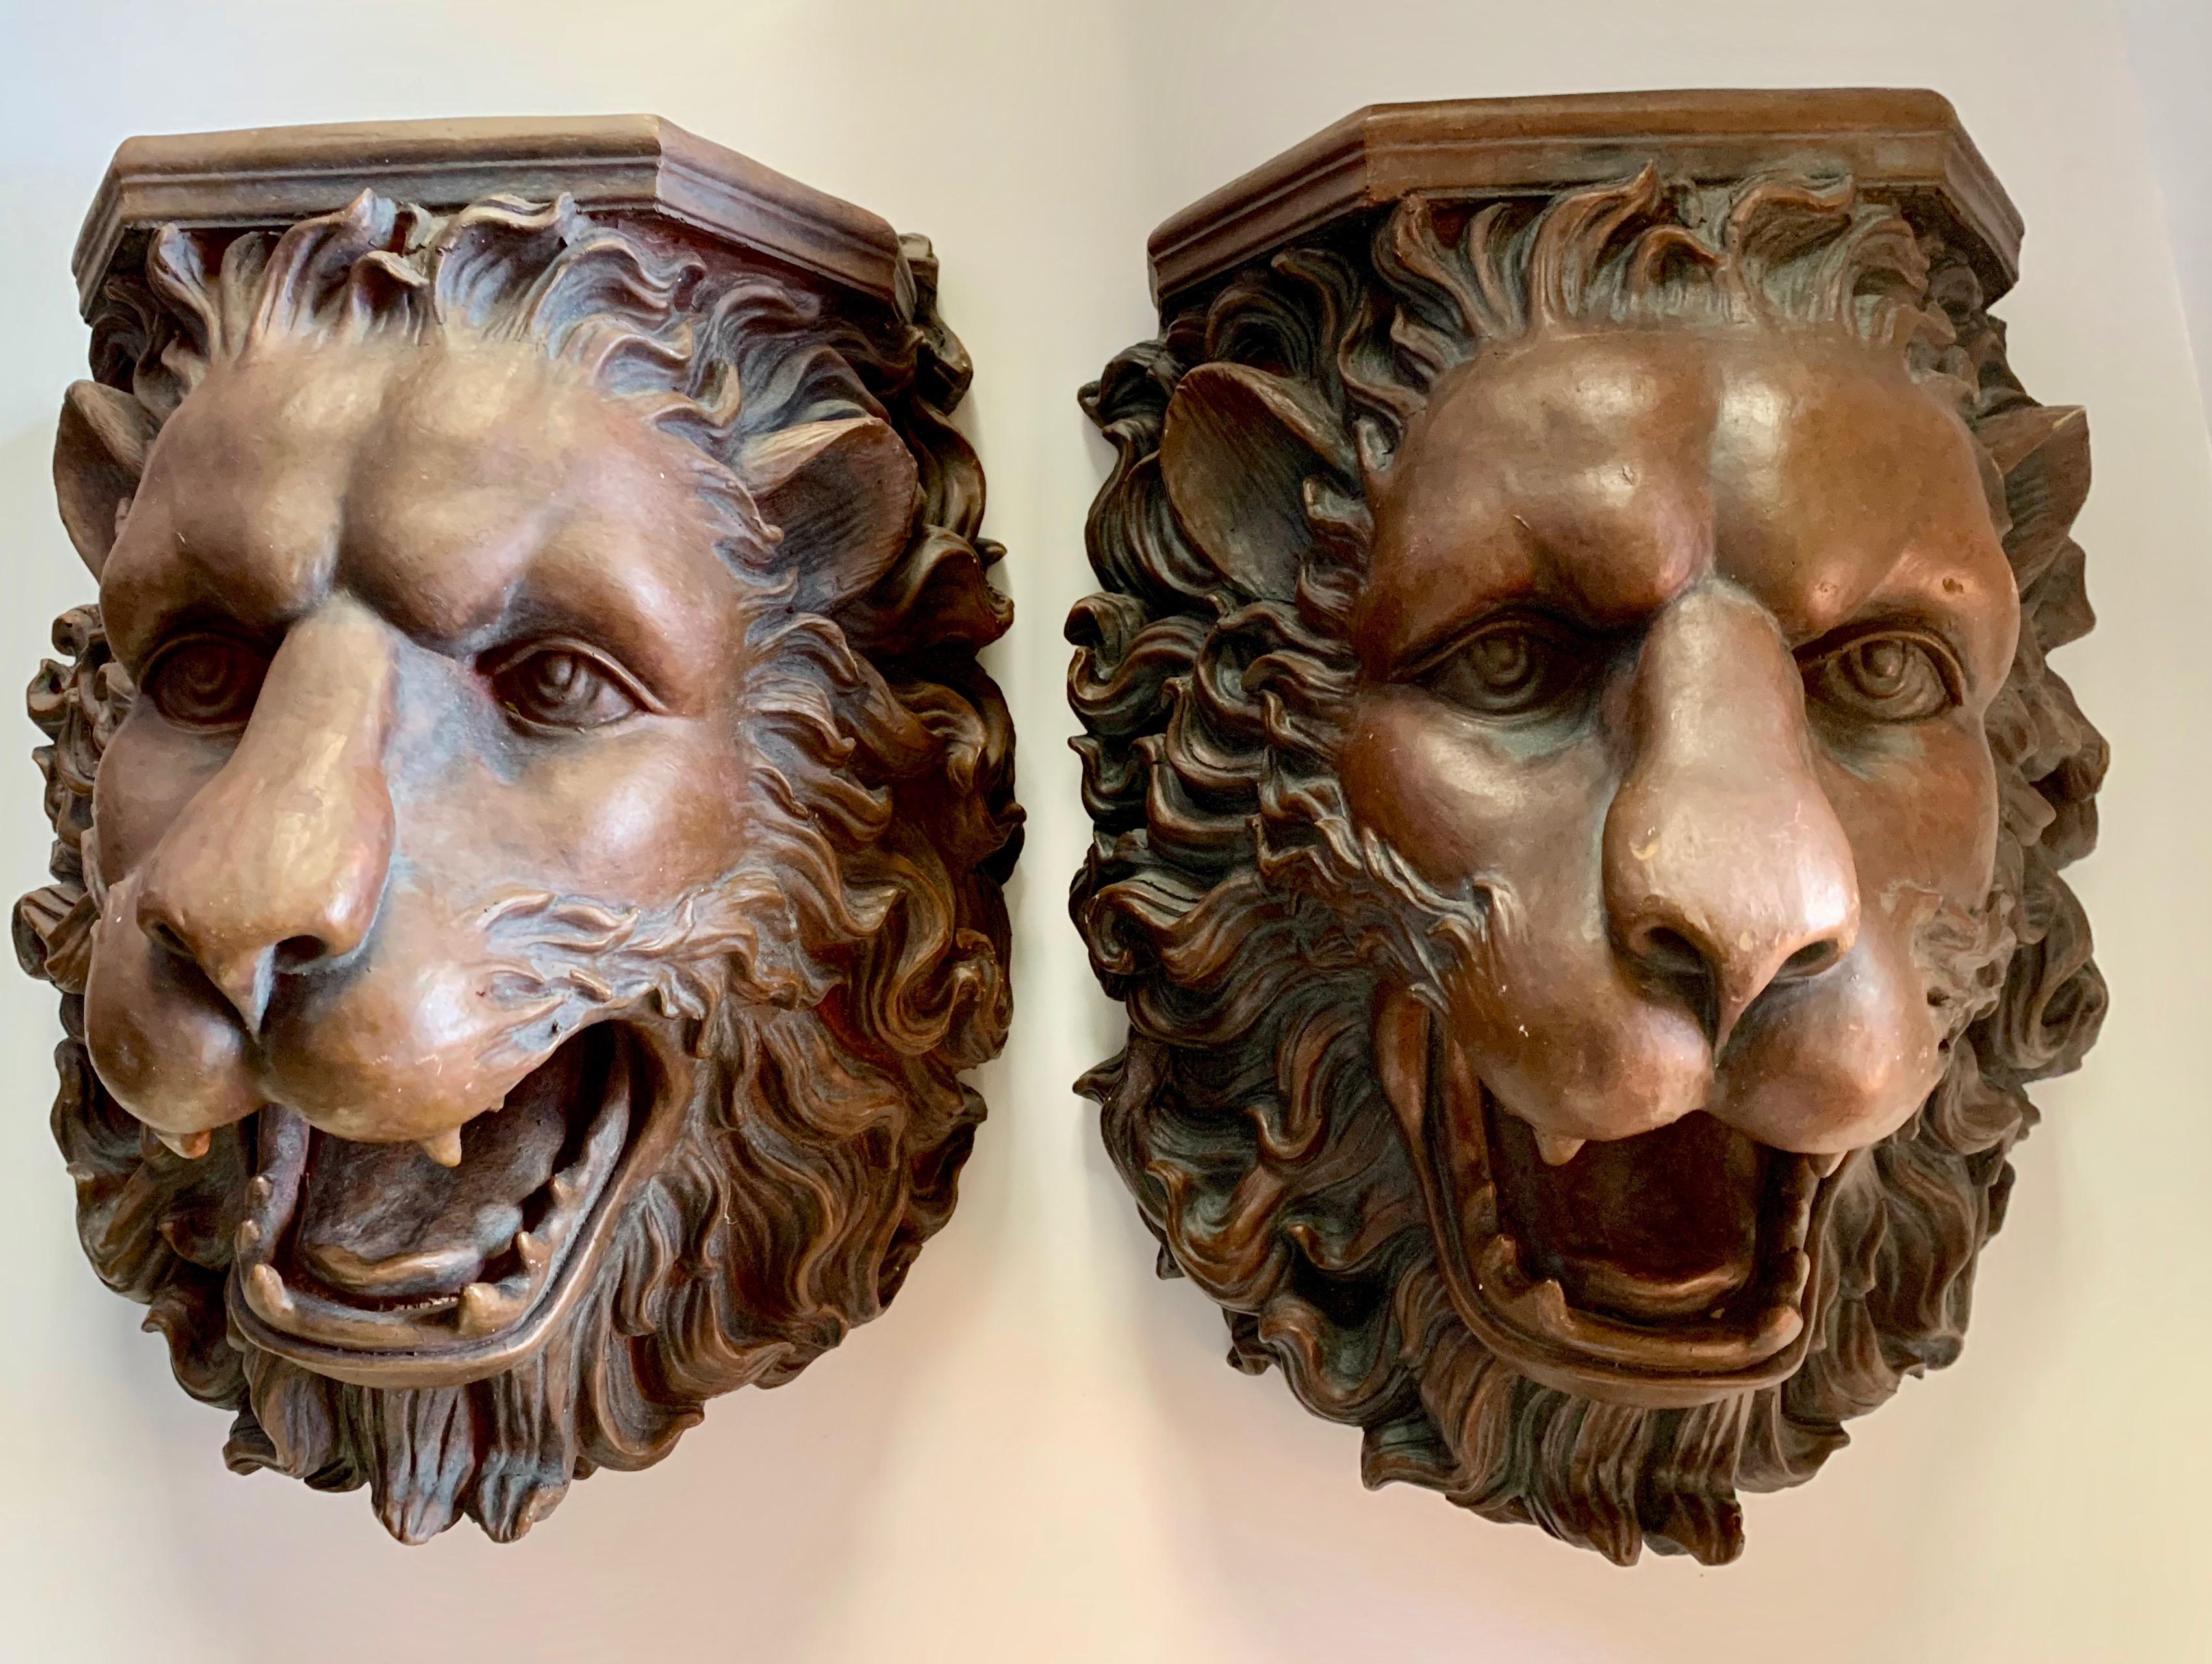 A monumental pair of lion wall shelves. A wonderfully detailed pair, with the look of wood, but a lighter material of resin or plastic. The pair have mounting holes in the rear for mounting. A handsome pair to flank a door or entry way... or create